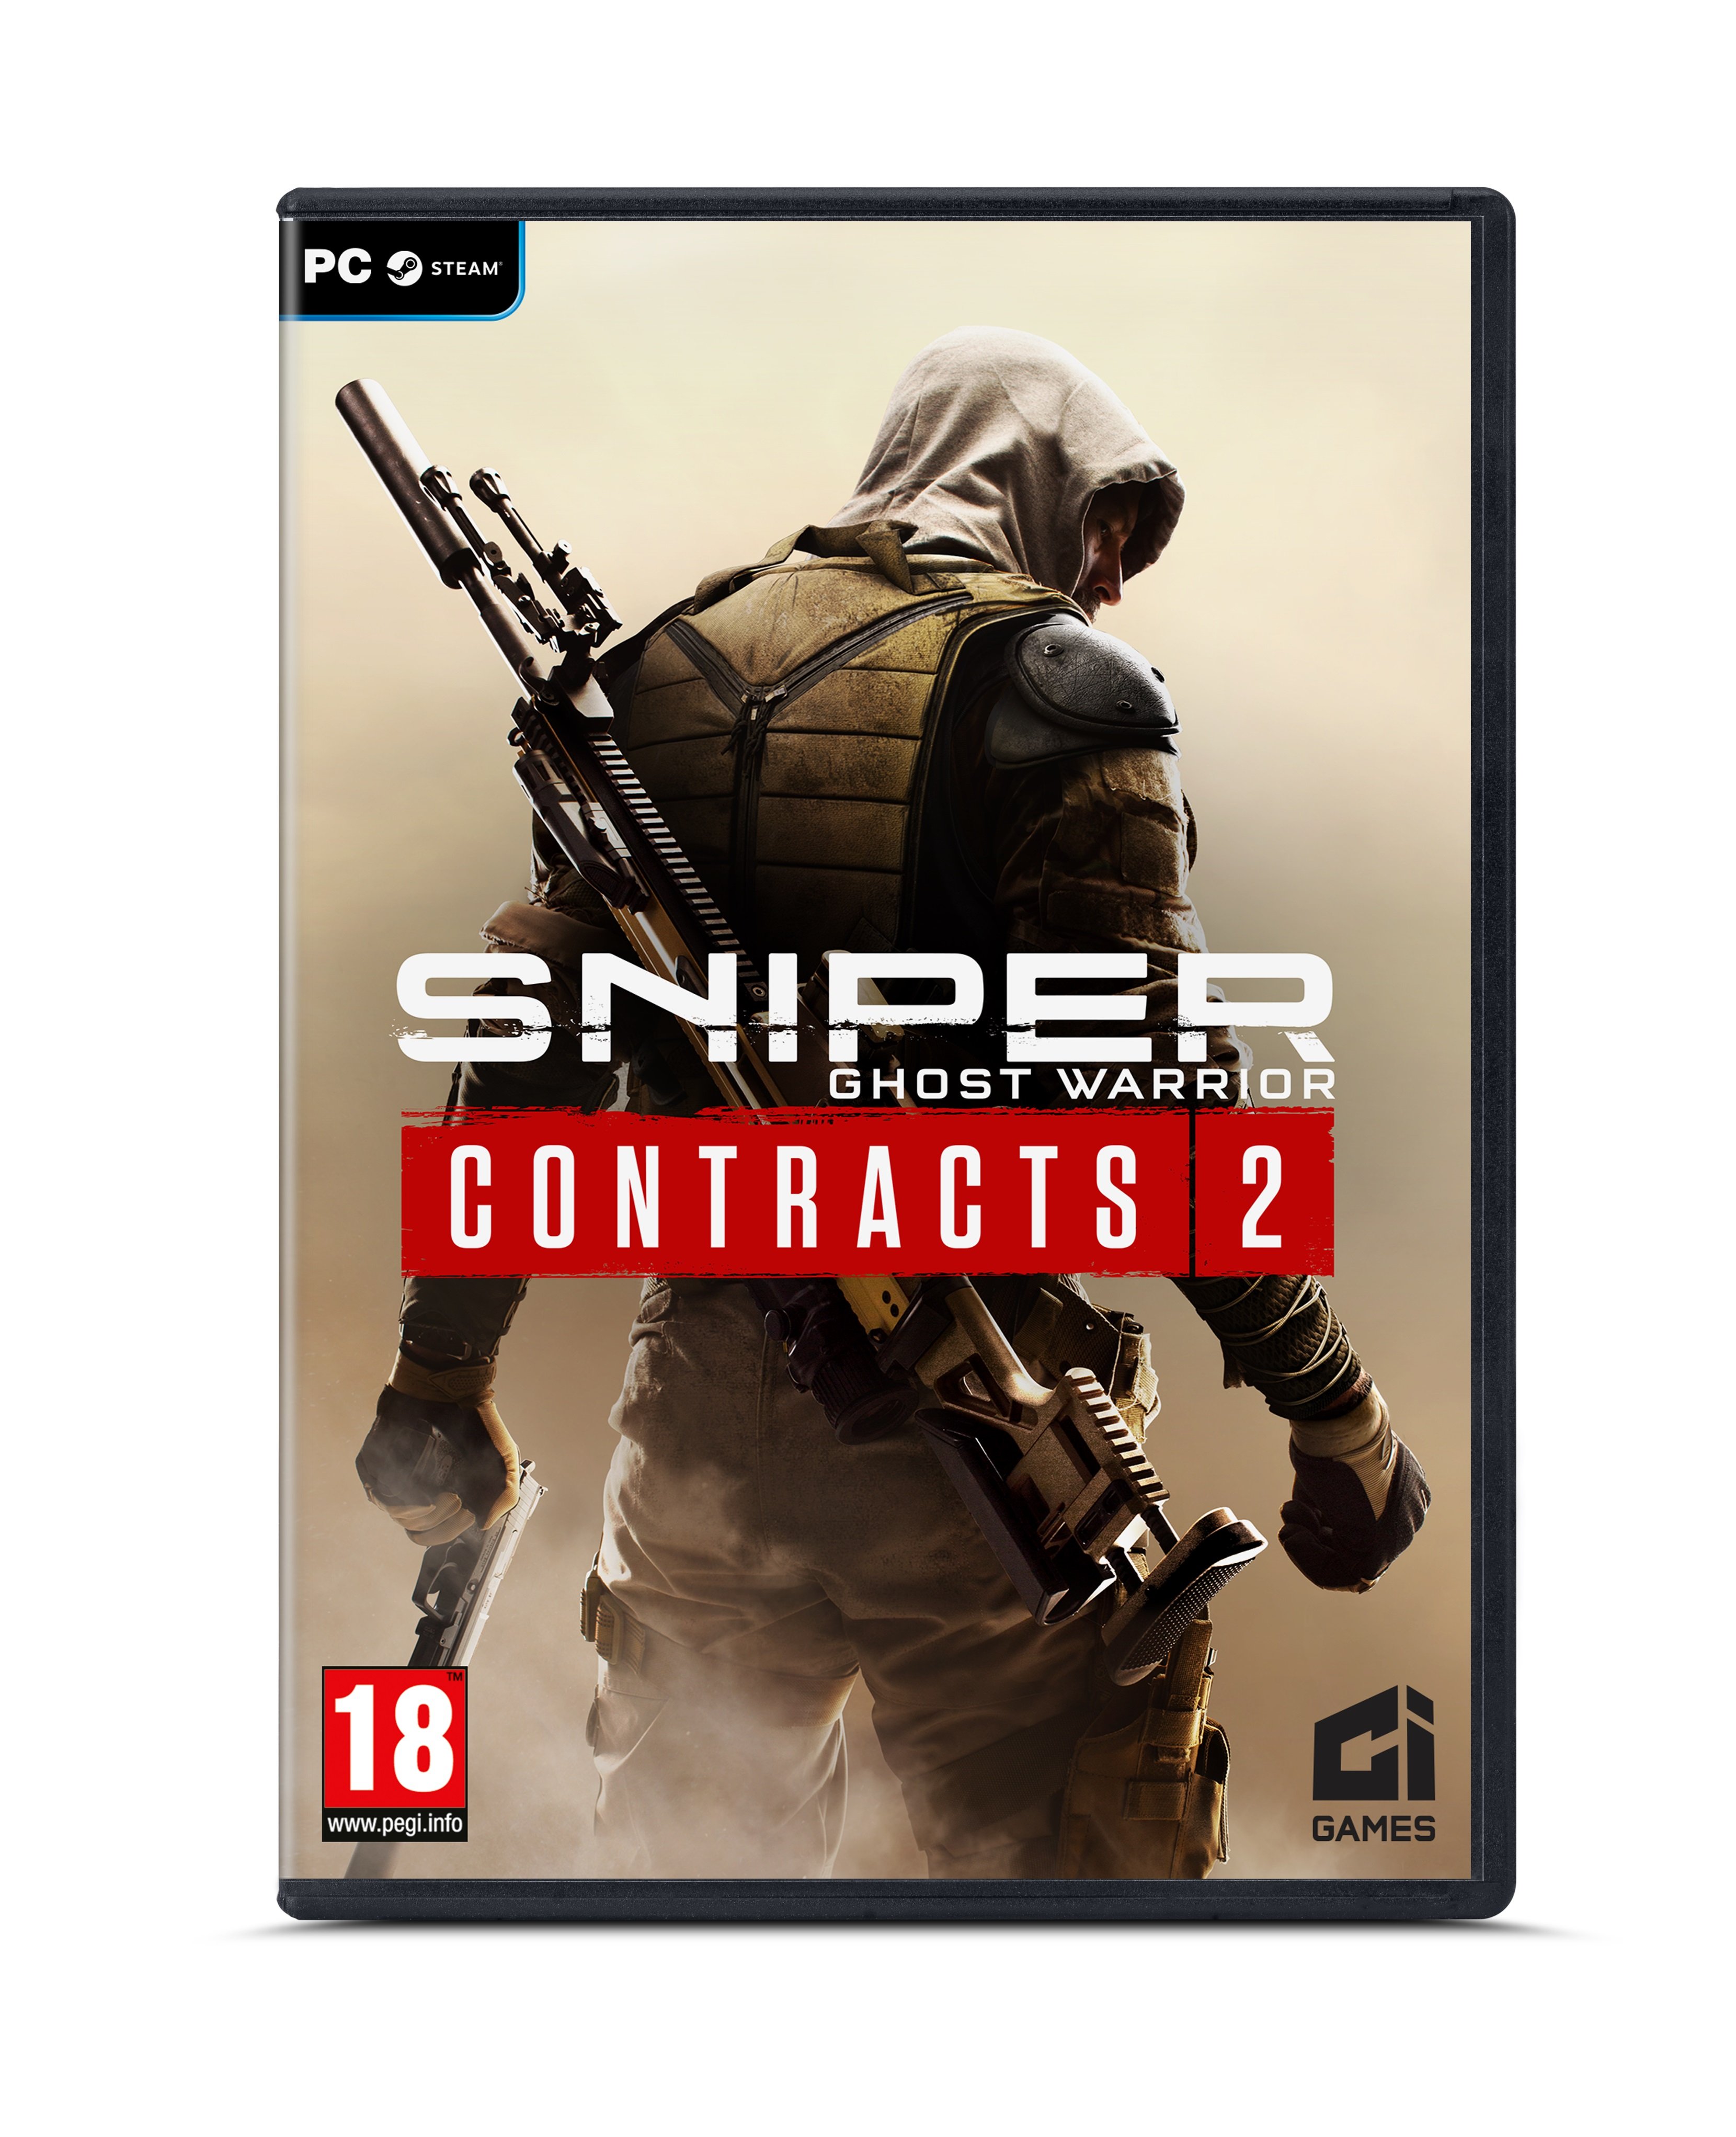 ghost warrior contracts download